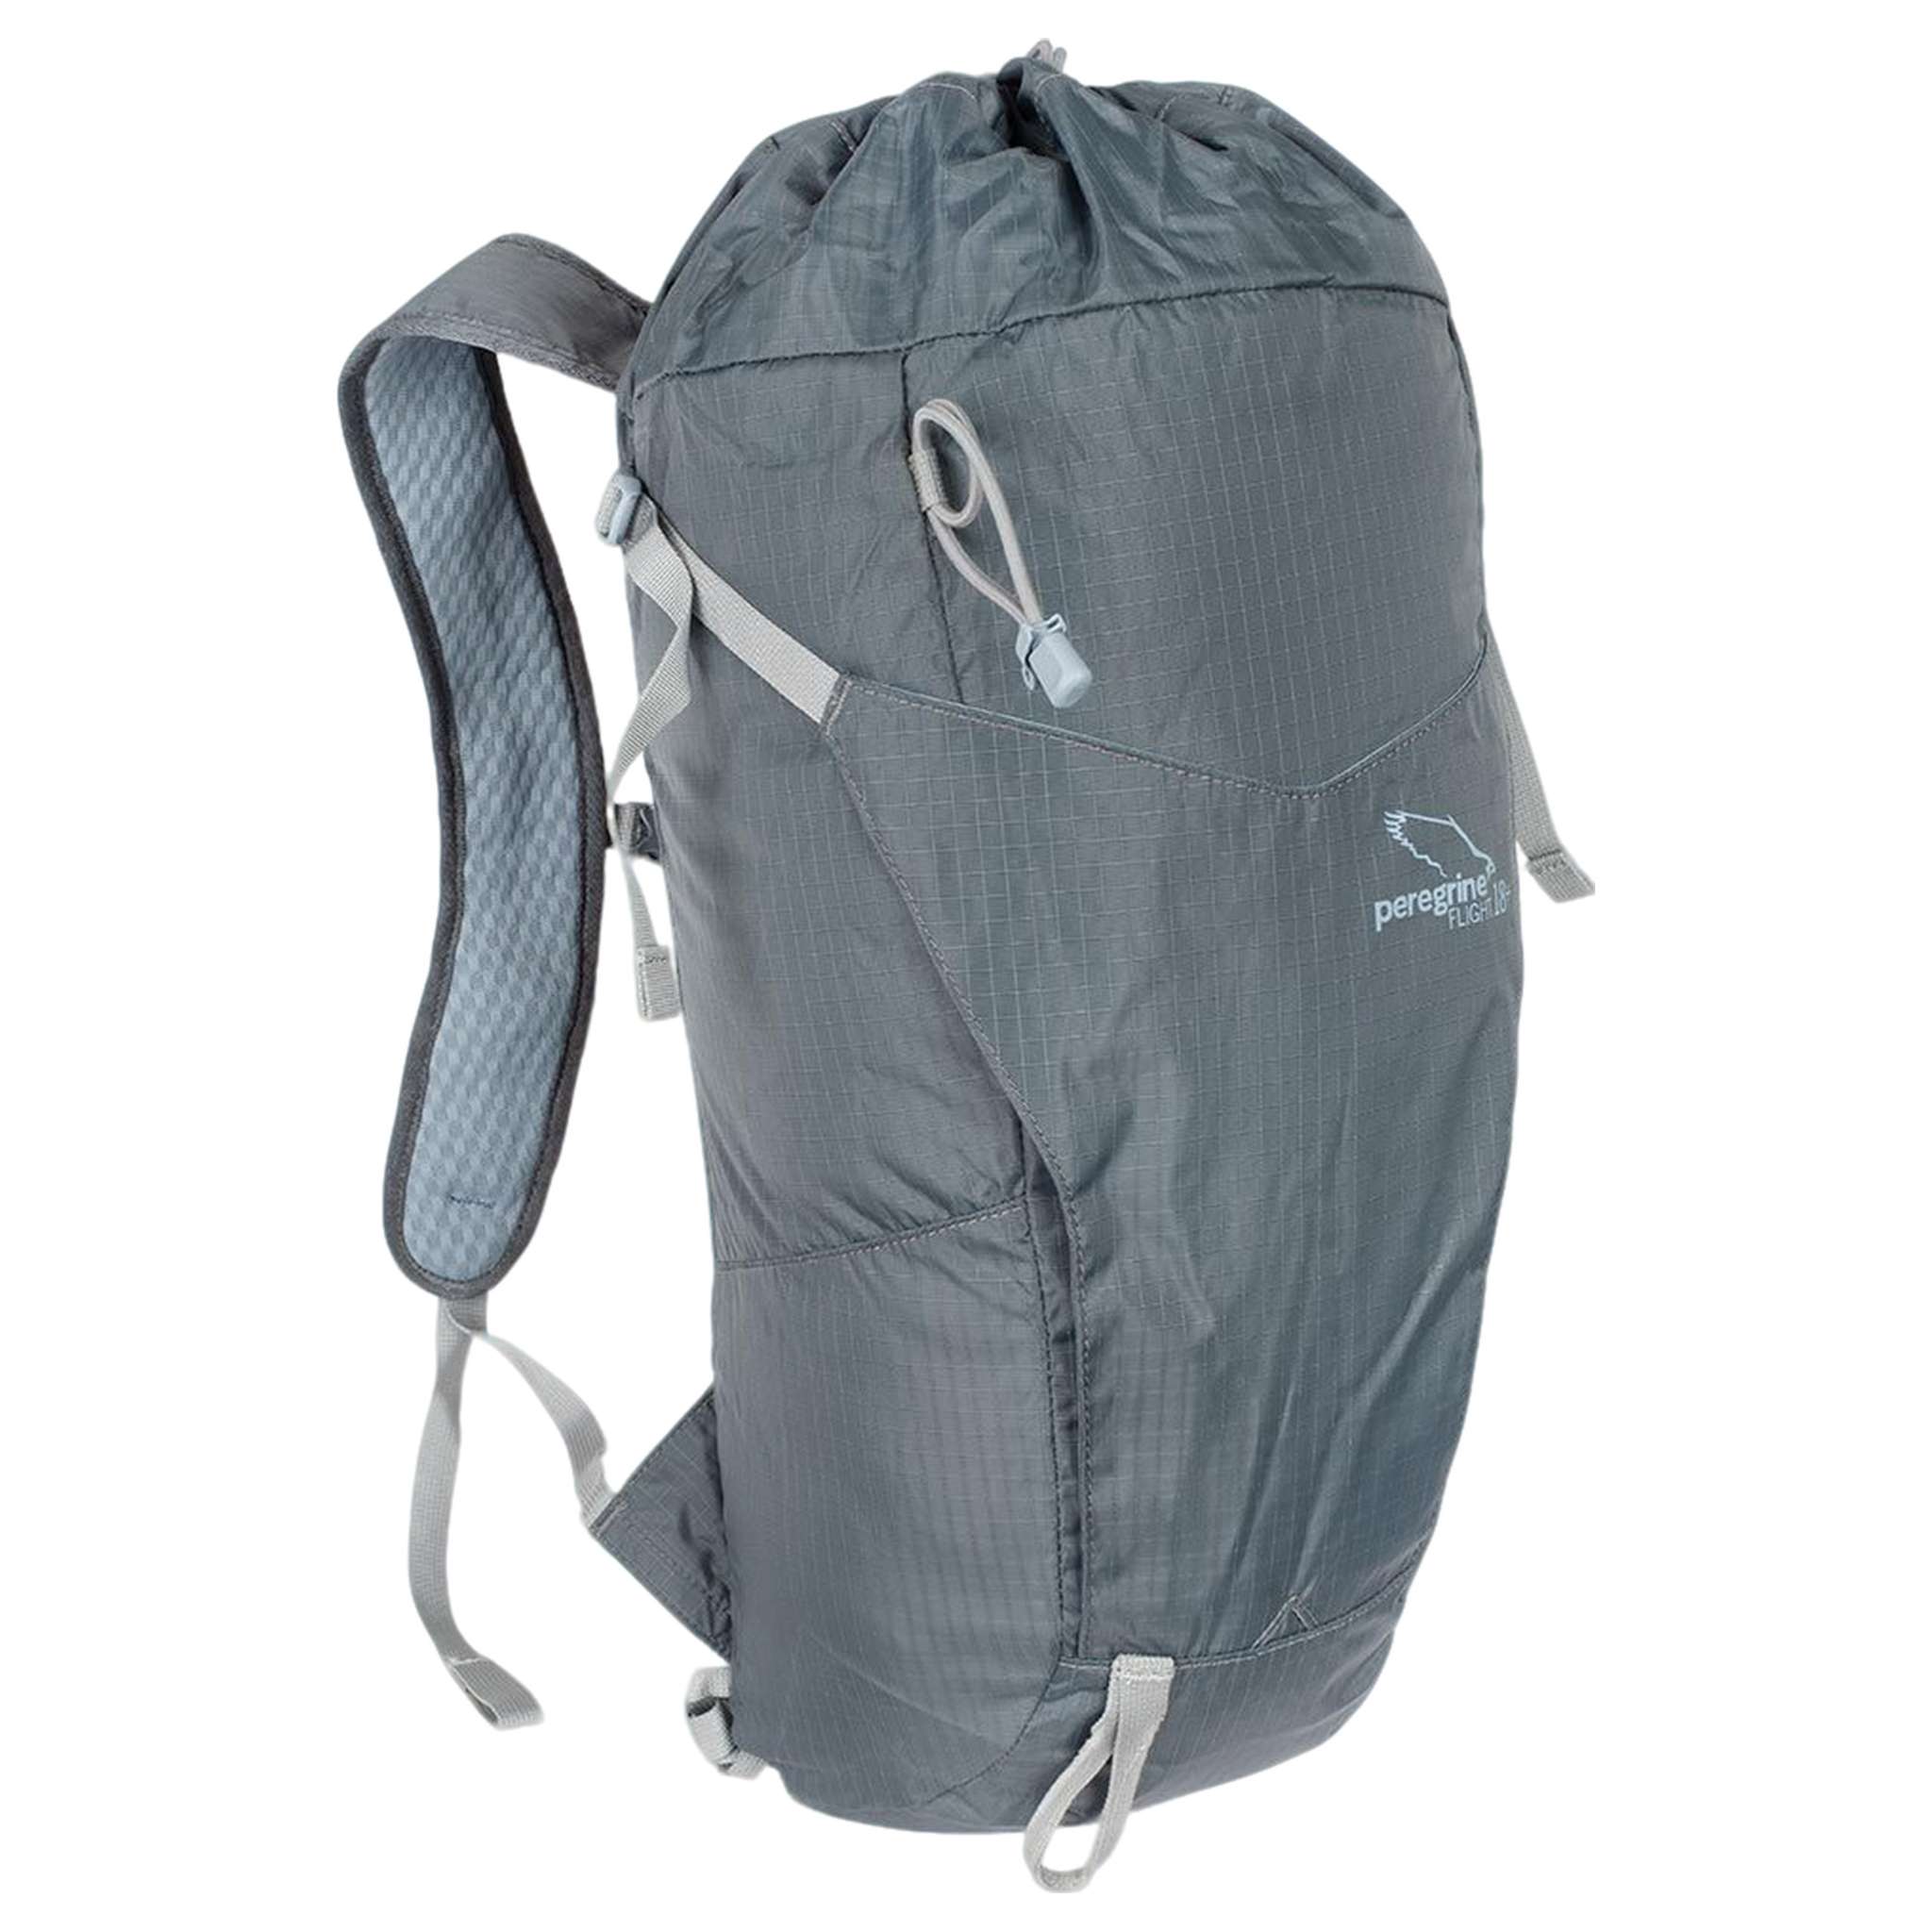 FLIGHT 18+ Lightweight Daypack – Durable for Summits & Scree Fields